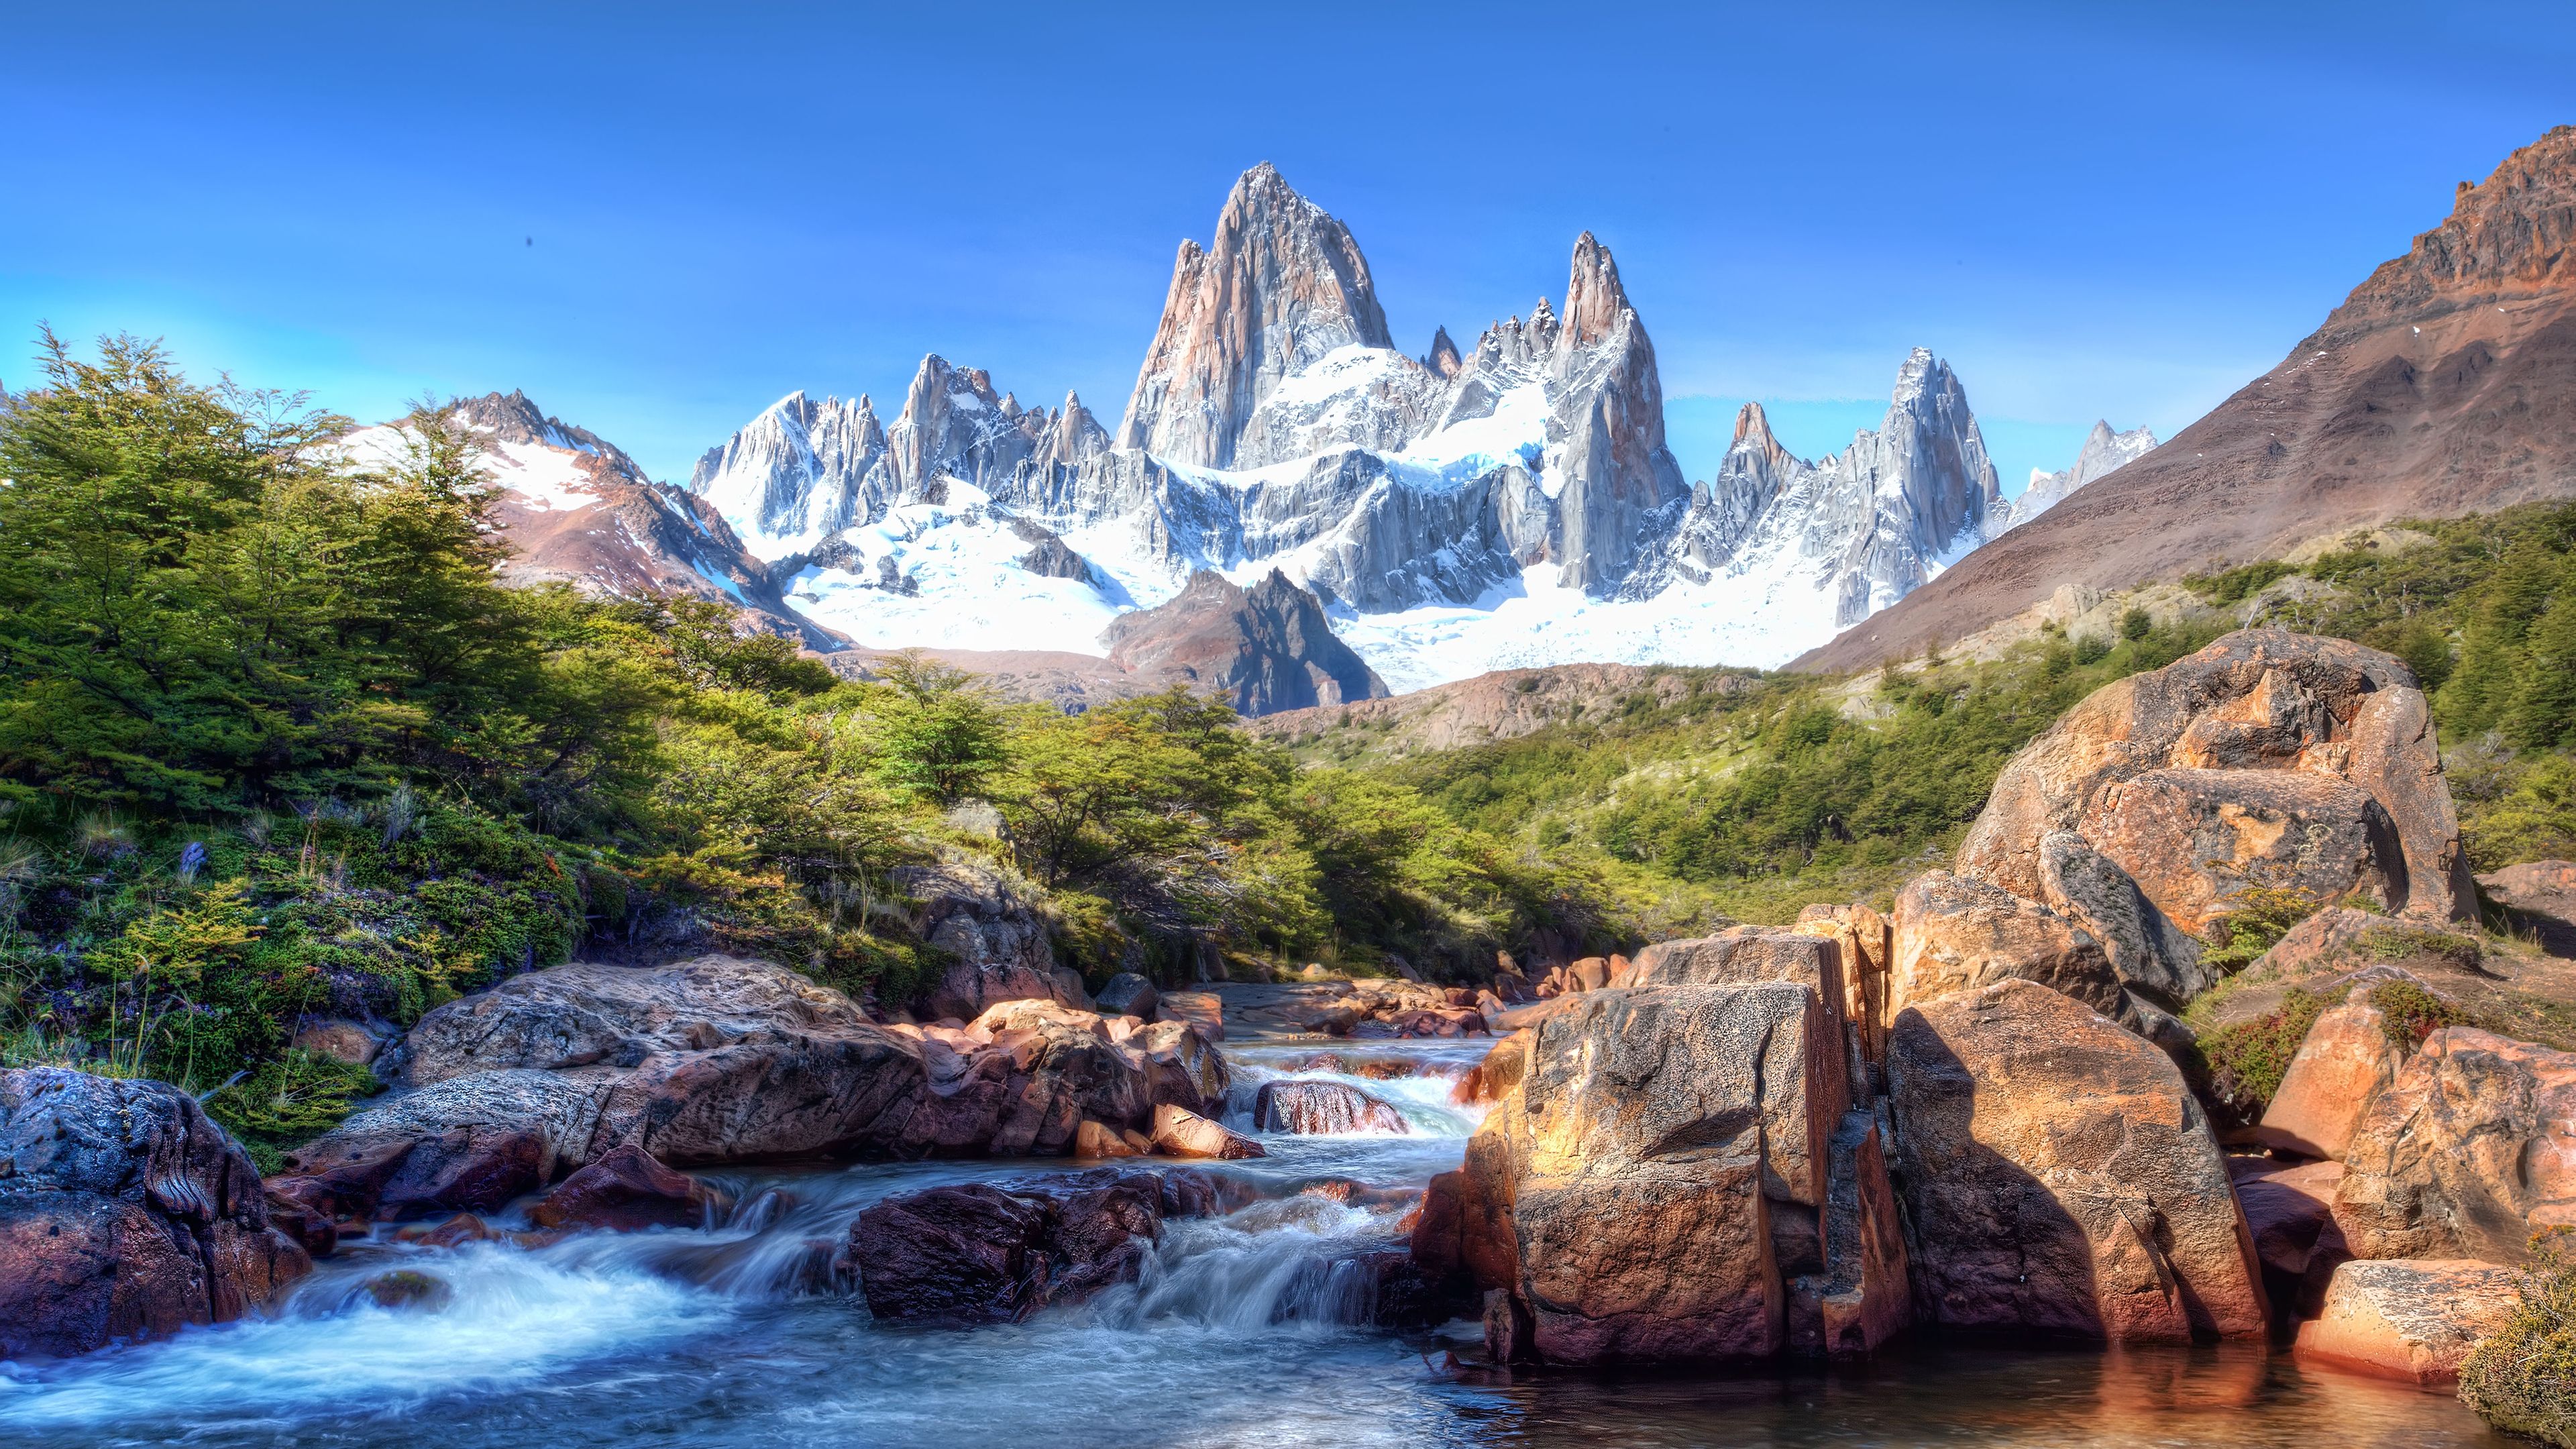 Fitz Roy, Patagonia, Glacier mountains, Snow covered, Argentina, Pictureque, River Stream, 4k Free deskk wallpaper, Ultra HD